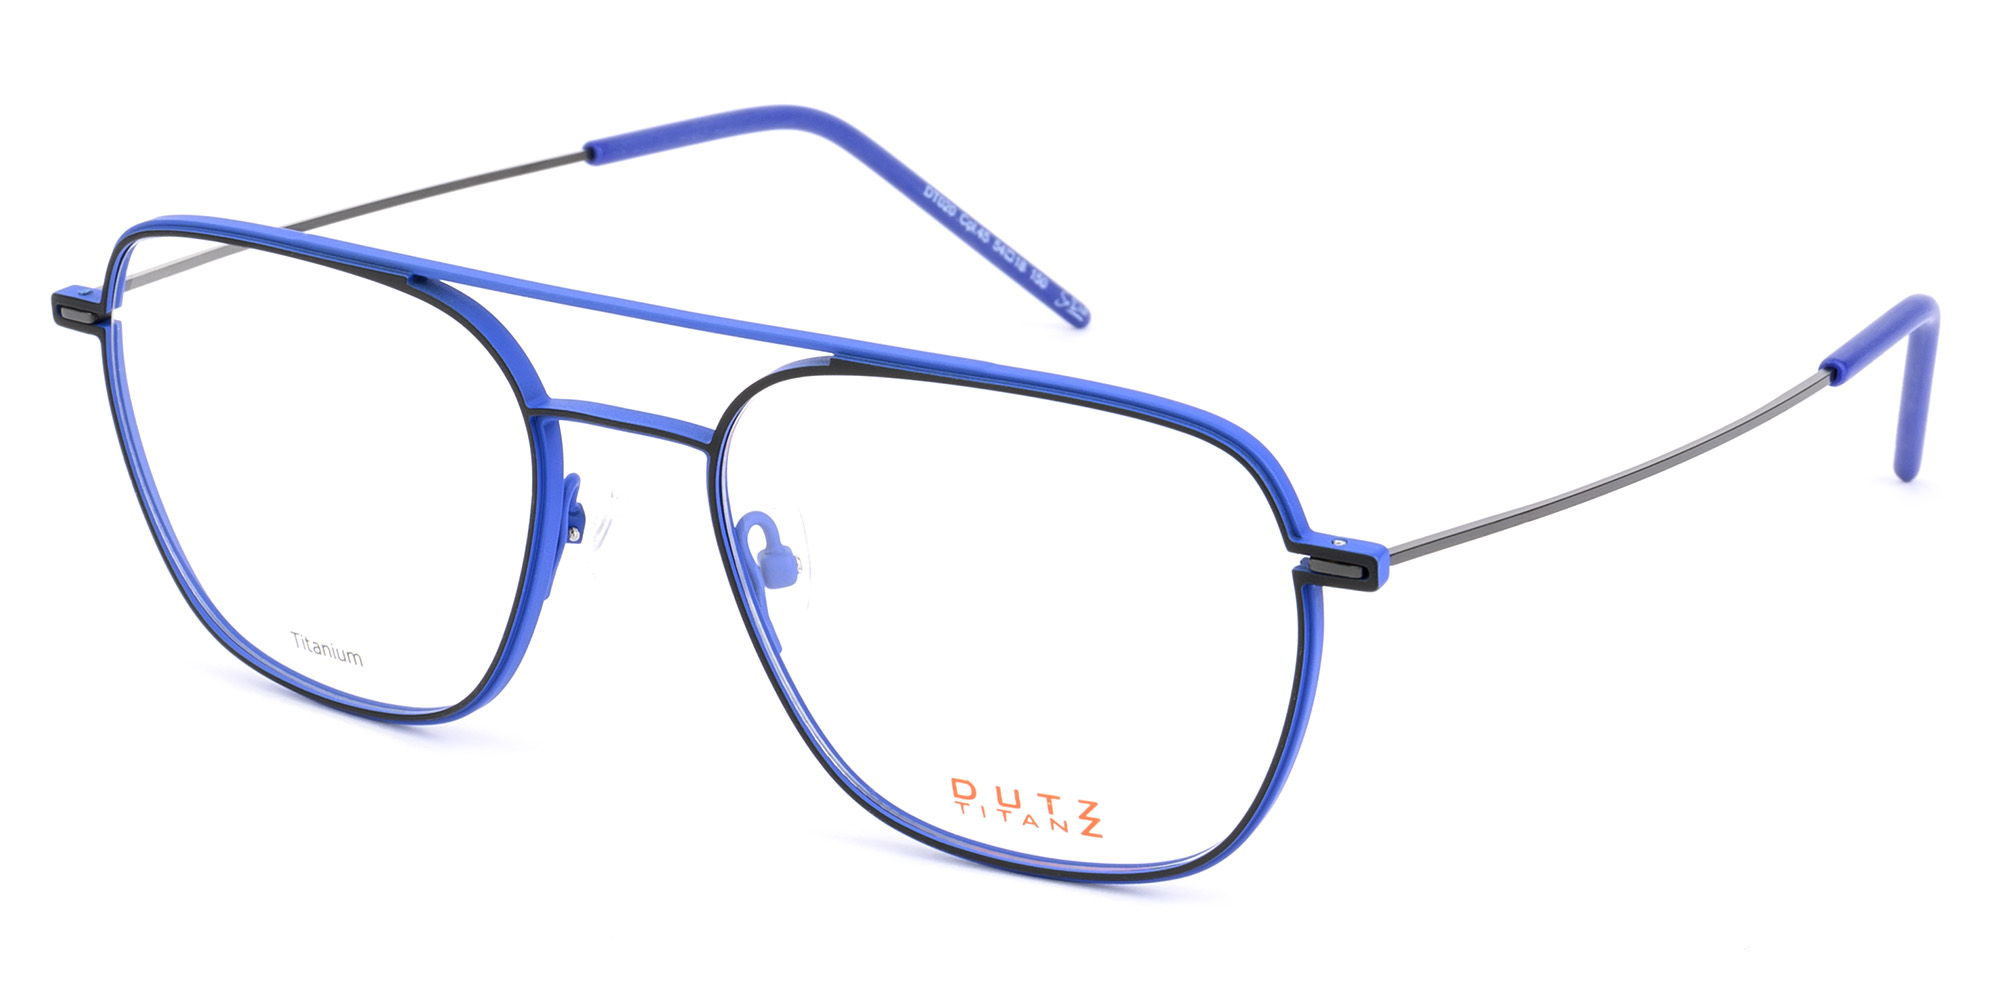 Man's bi-color, black, titanium optical frame and temples with bright blue details and matching acetate temple tips